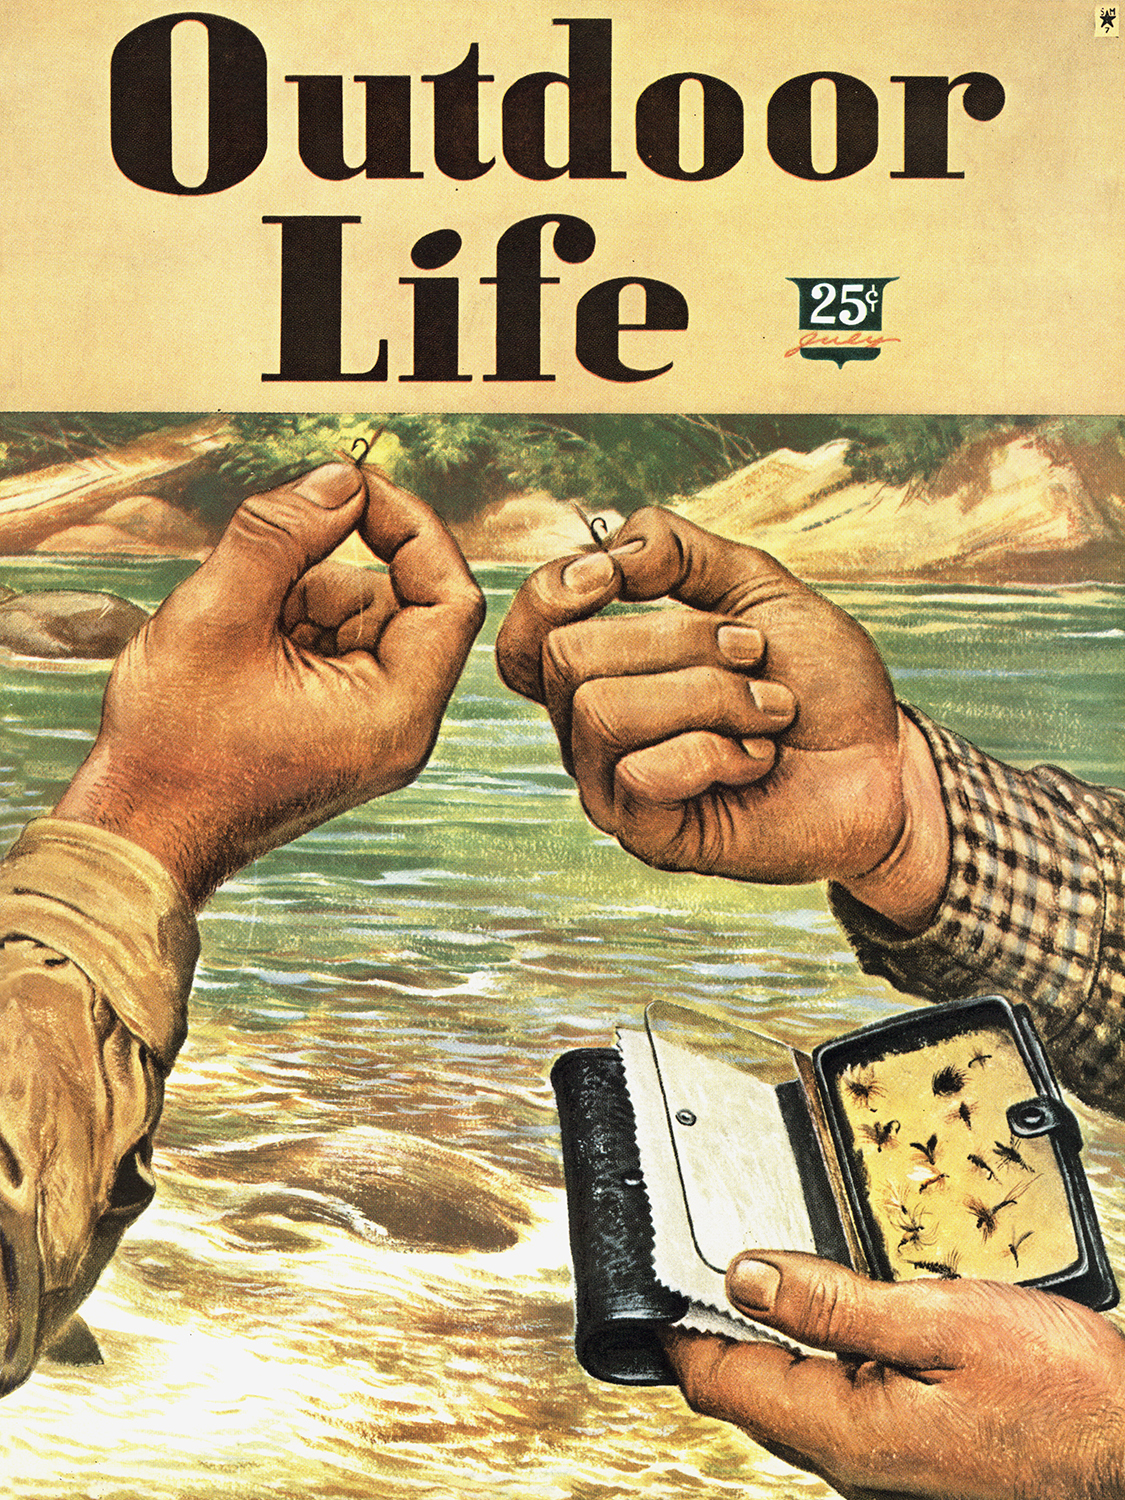 magazine cover with fishing flies